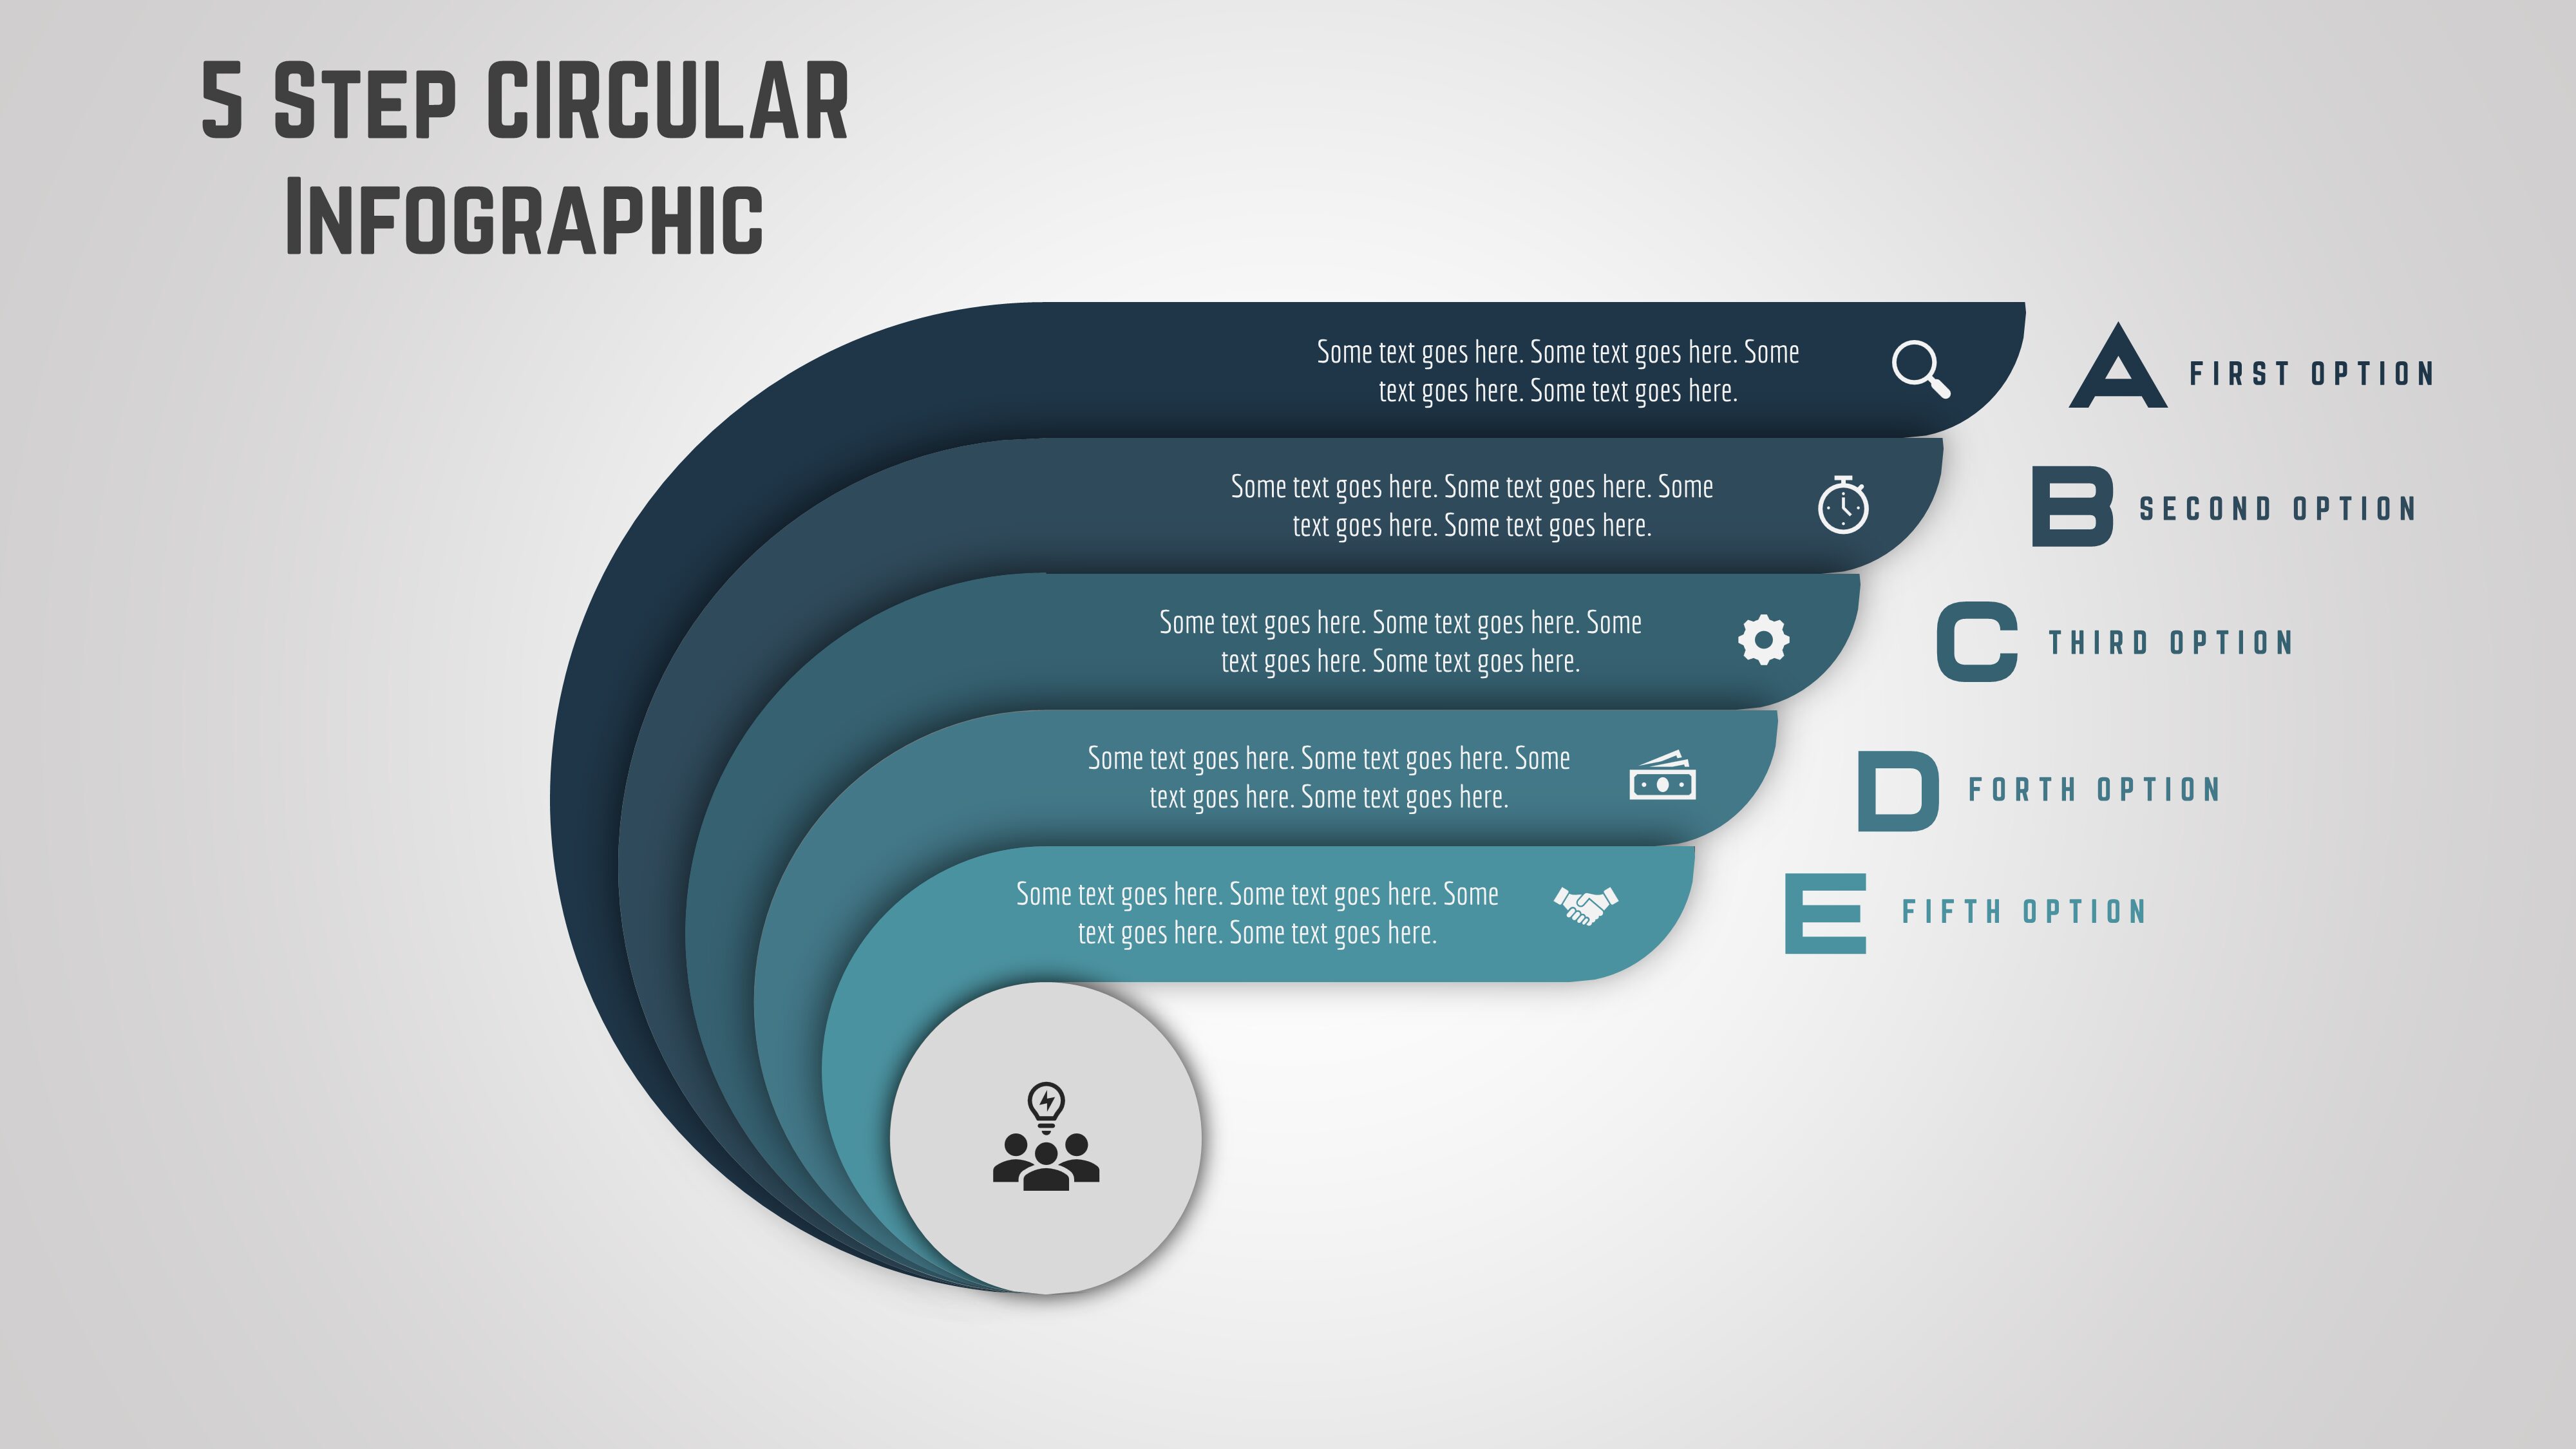 17 Powerpoint 5 Step Circular Infographic Powerup Wit 6540